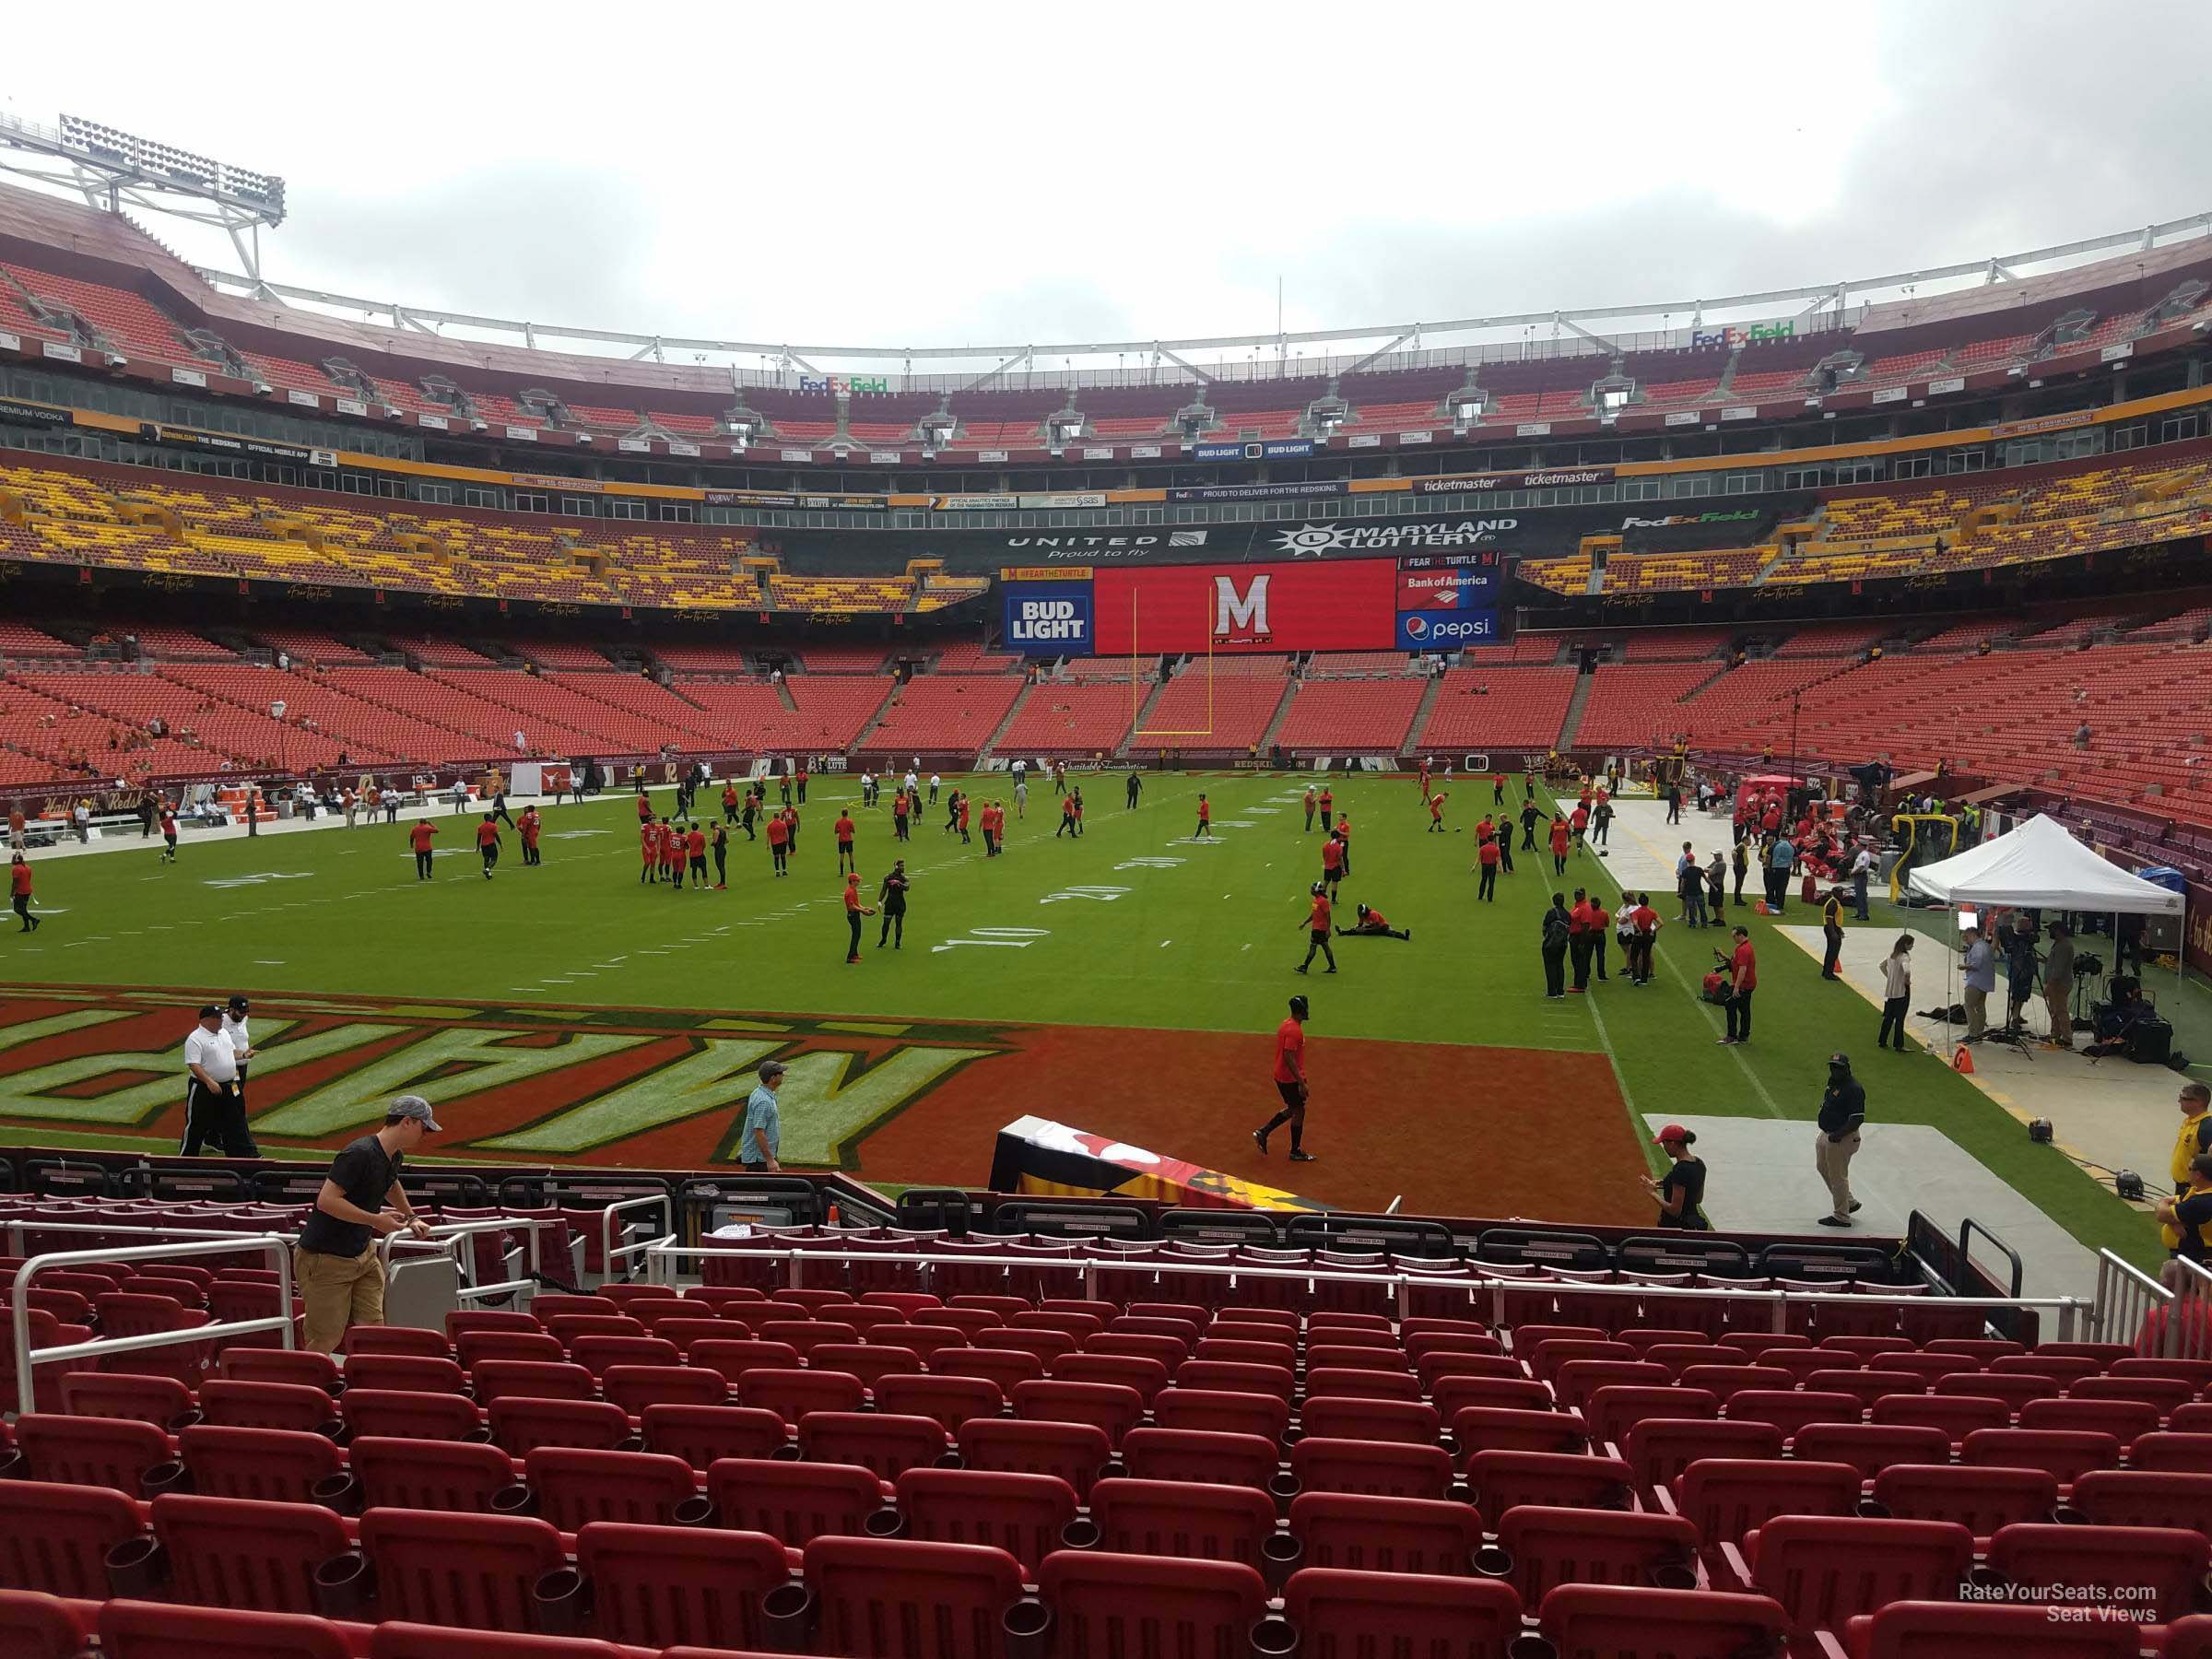 section 109, row 13 seat view  - fedexfield